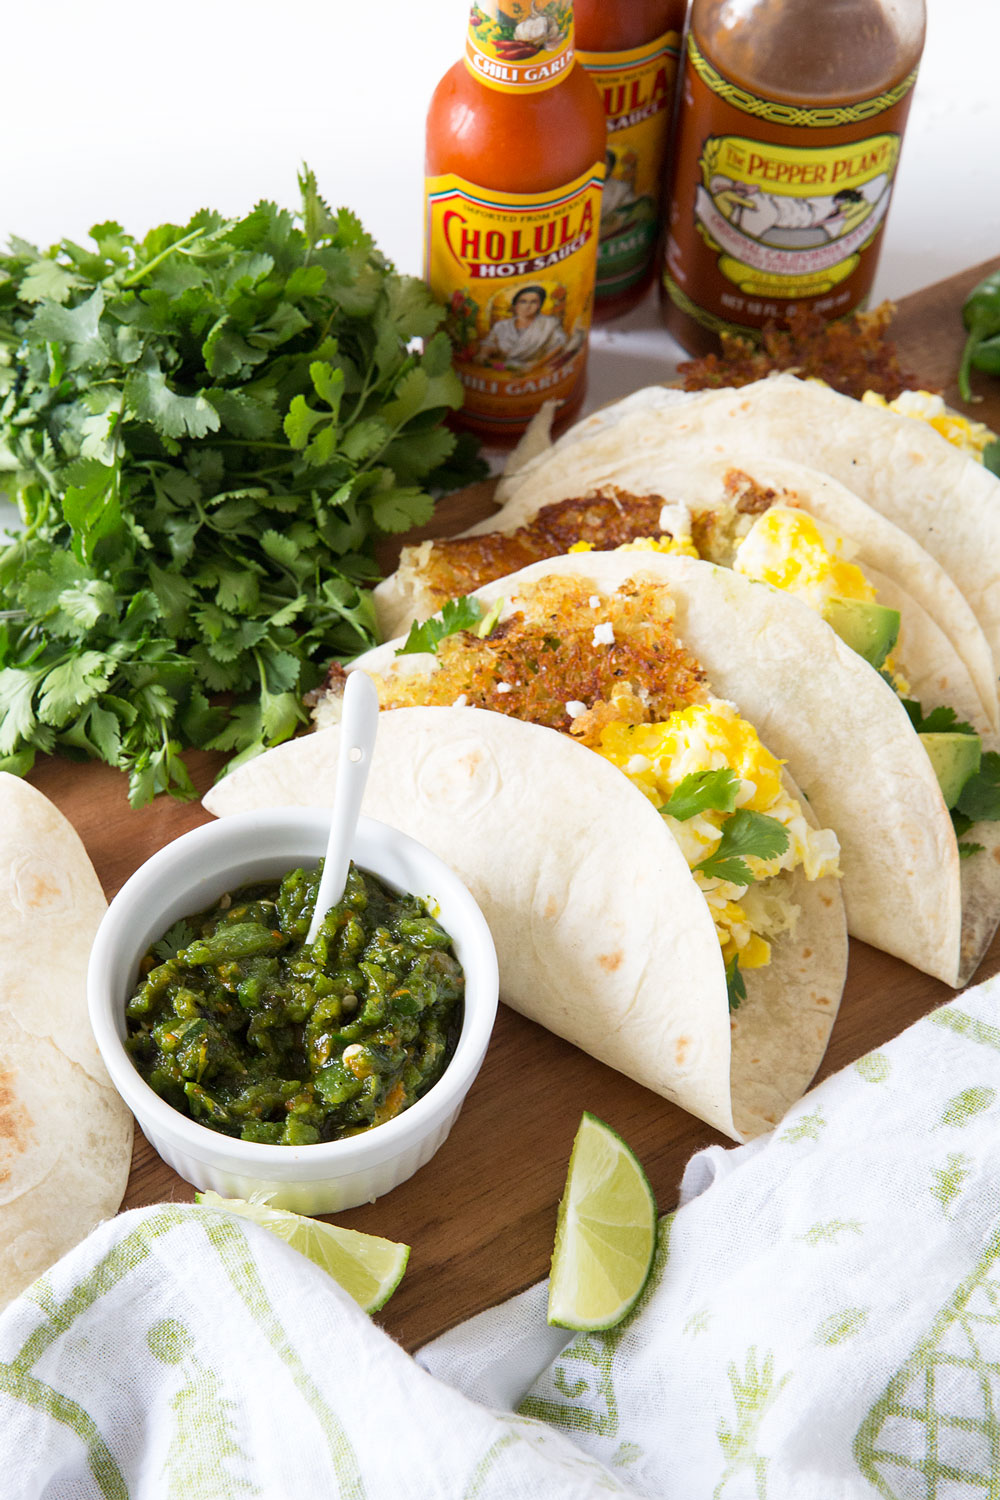 breakfast tacos with green chile sauce by @julieskitchen 